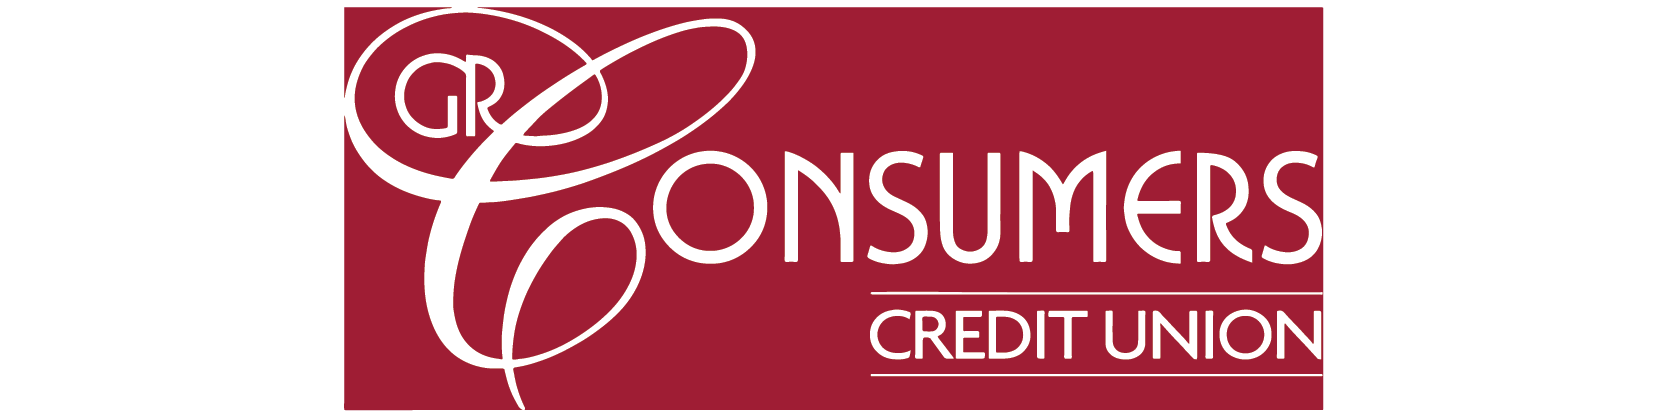 GR Consumers Credit Union